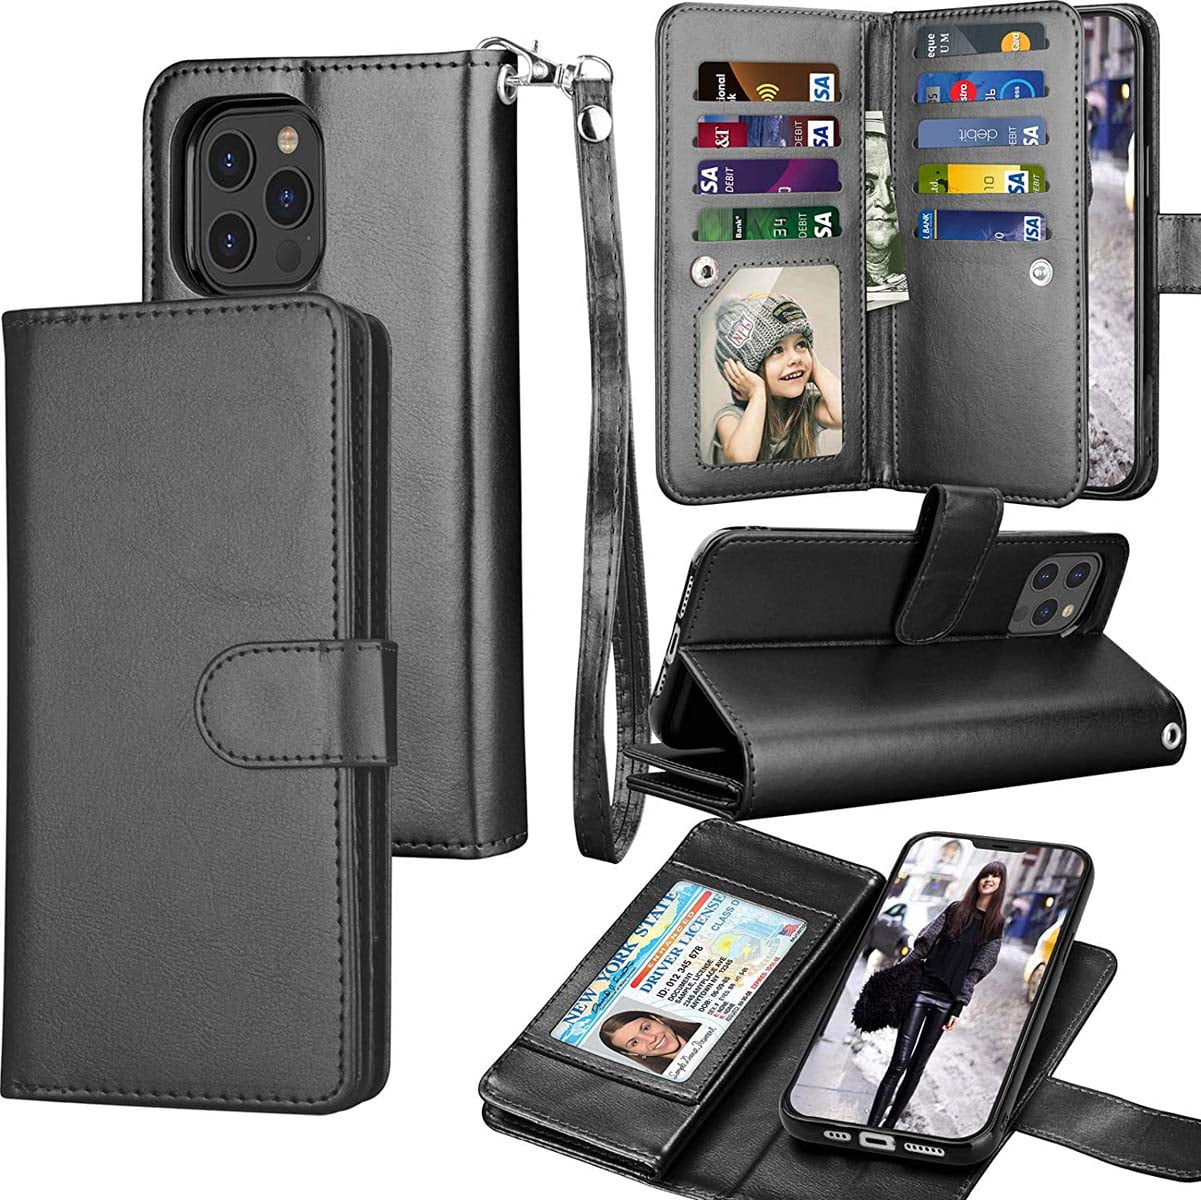 Tekcoo Wallet Case for iPhone 12 Pro Max / iPhone 12 Mini 2020 Luxury